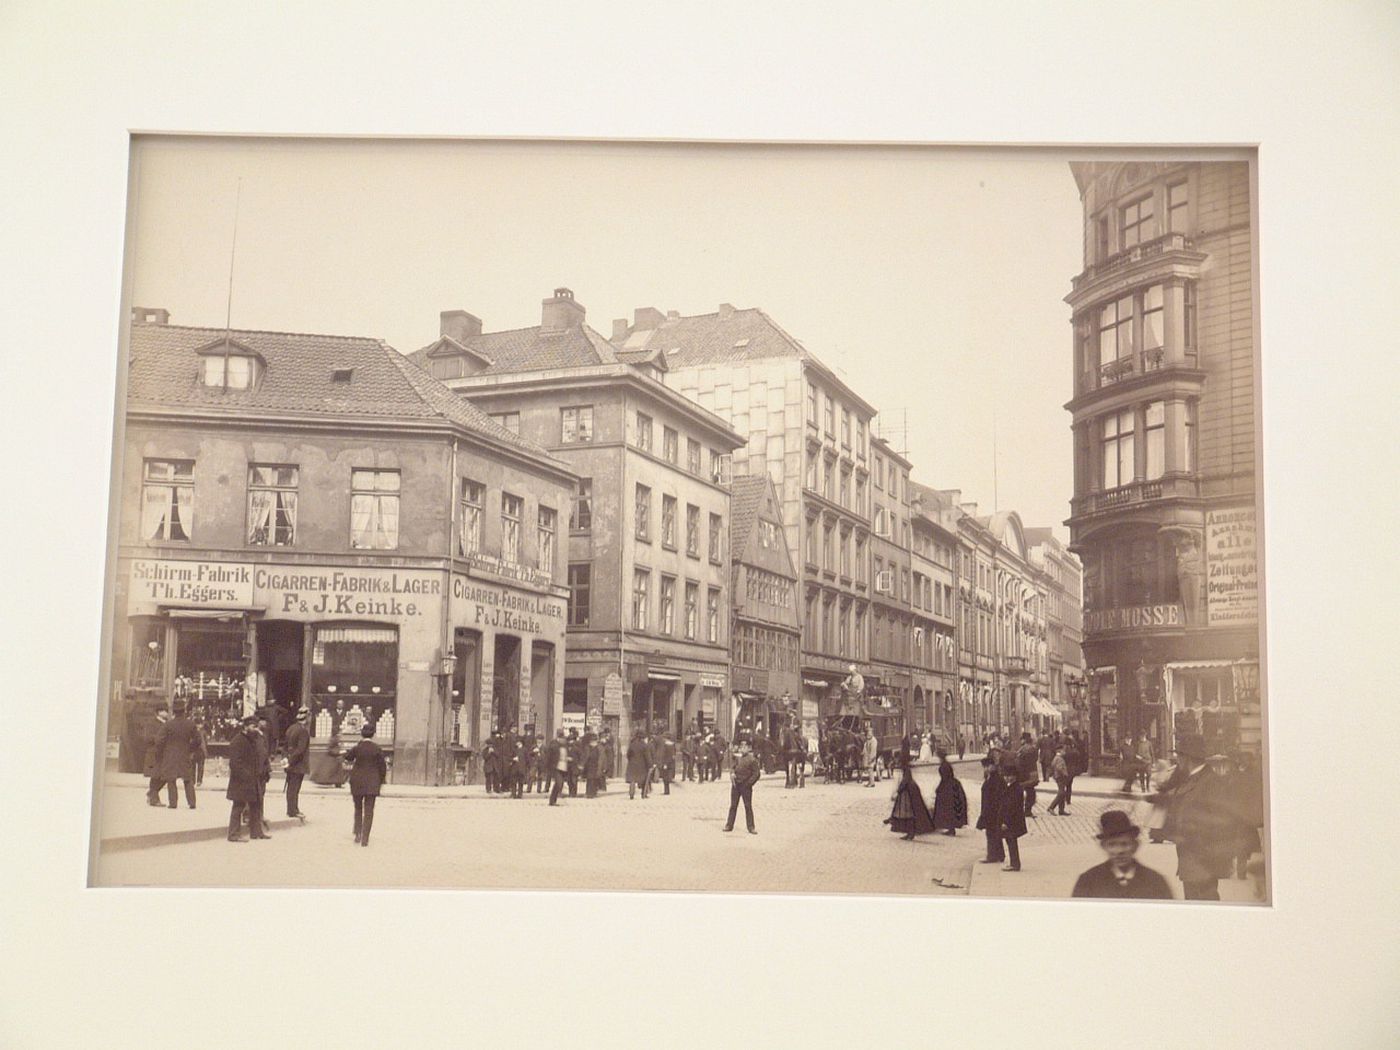 View of intersection of Never Wall and Admiralitatstrasse, Hamburg, Germany